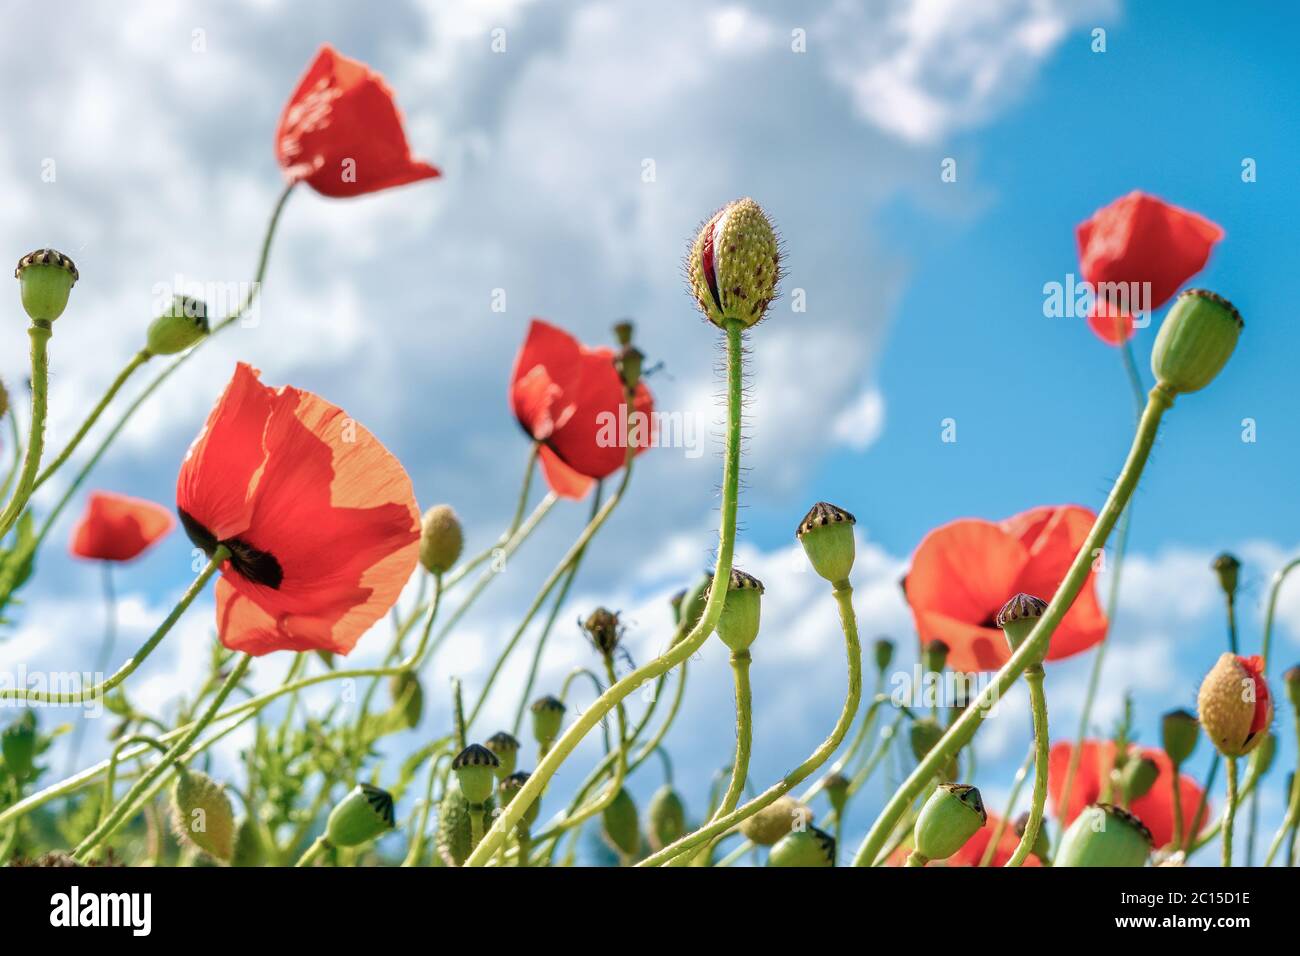 Red poppies in bloom on a field Stock Photo